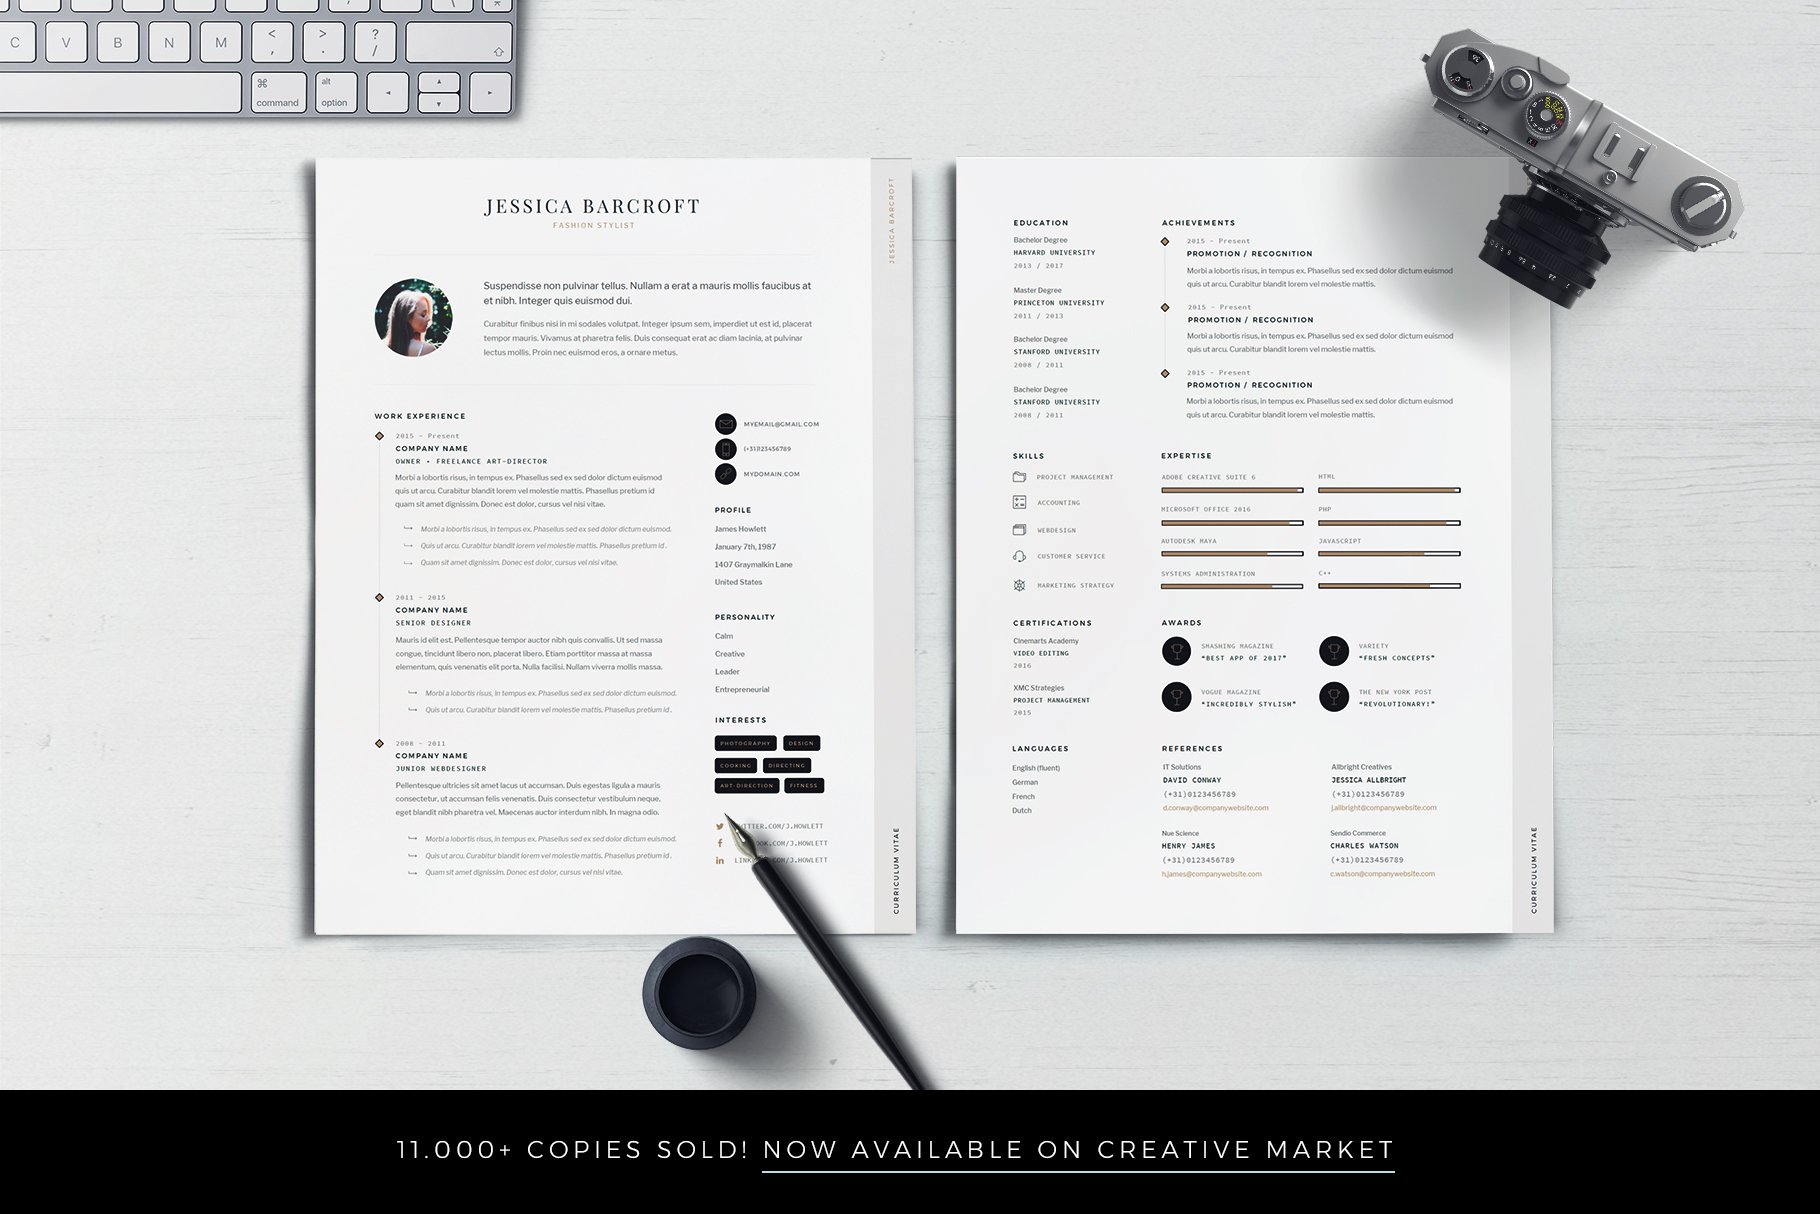 Professional resume on a desk with a camera and keyboard.